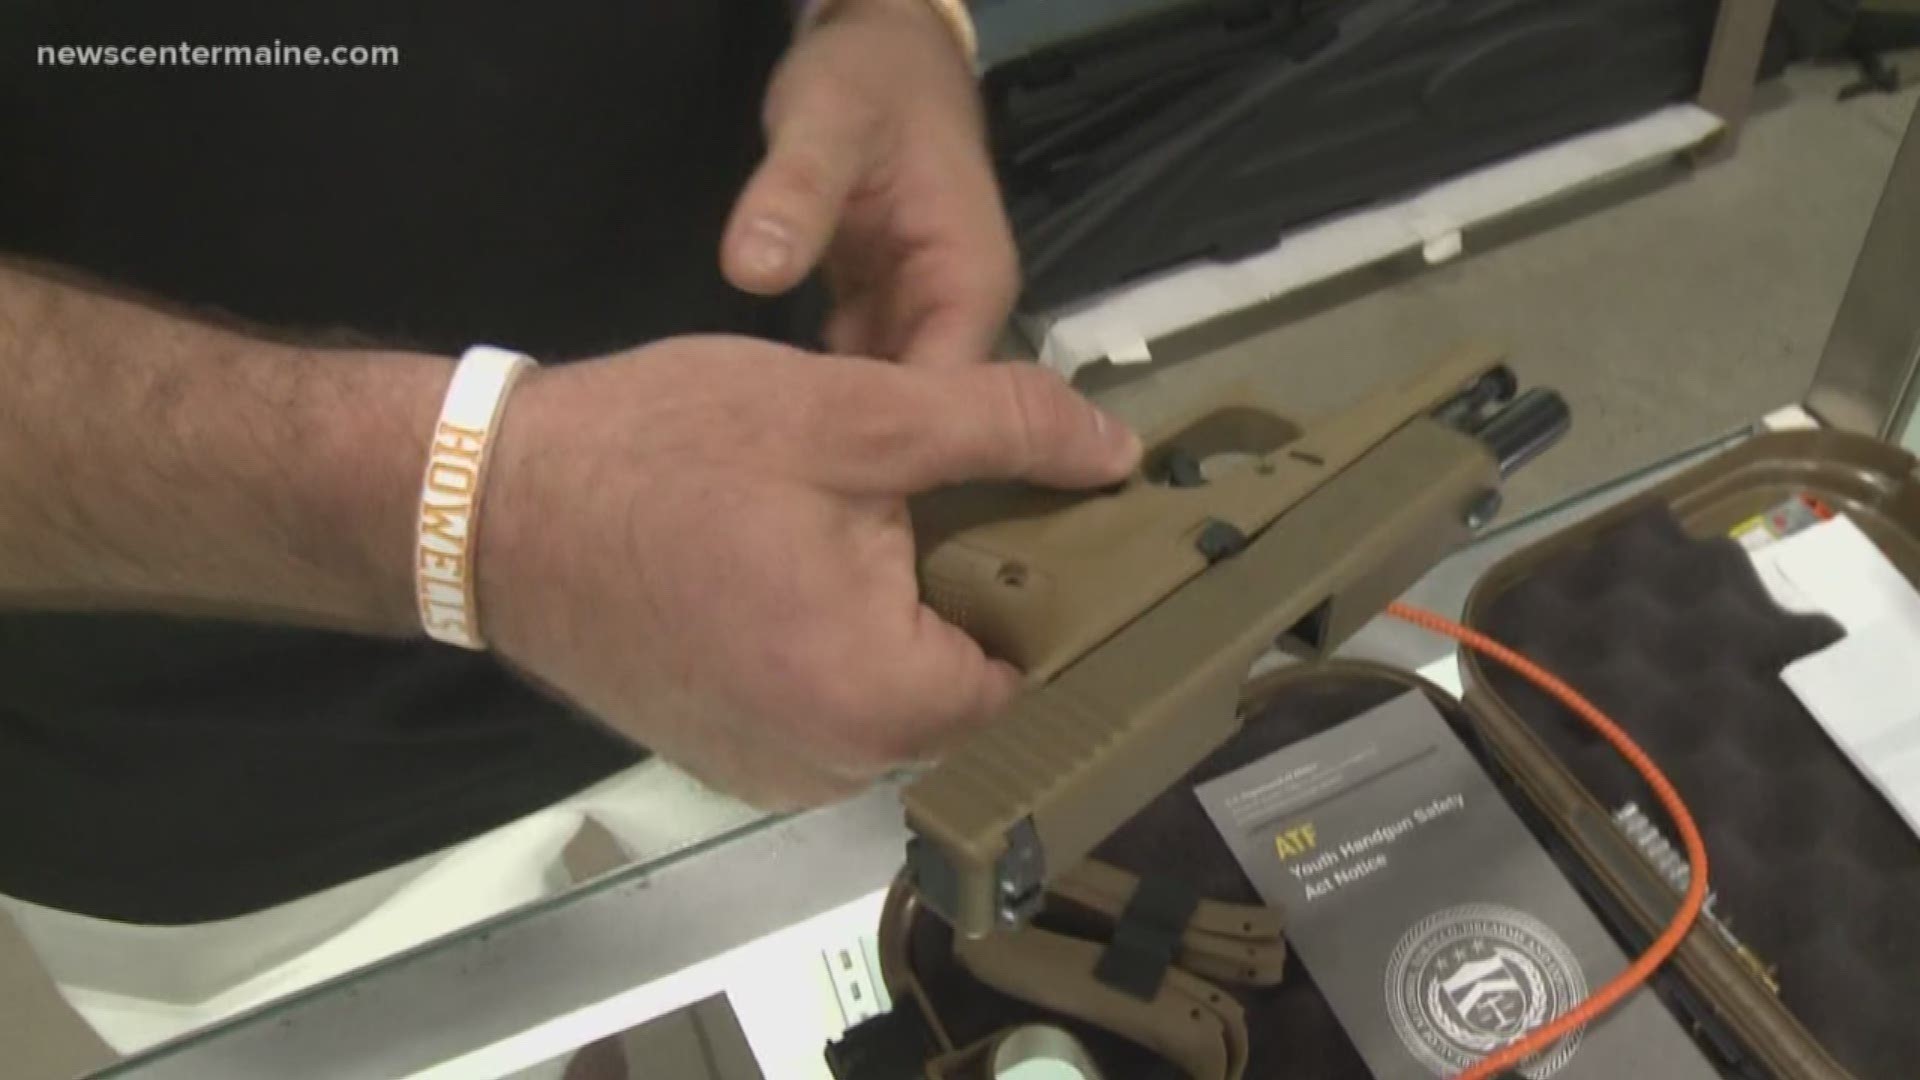 Maine lawmakers have proposed a bill to take dangerous weapons away from people for two weeks if they are found to be 'in crisis' by health officials.